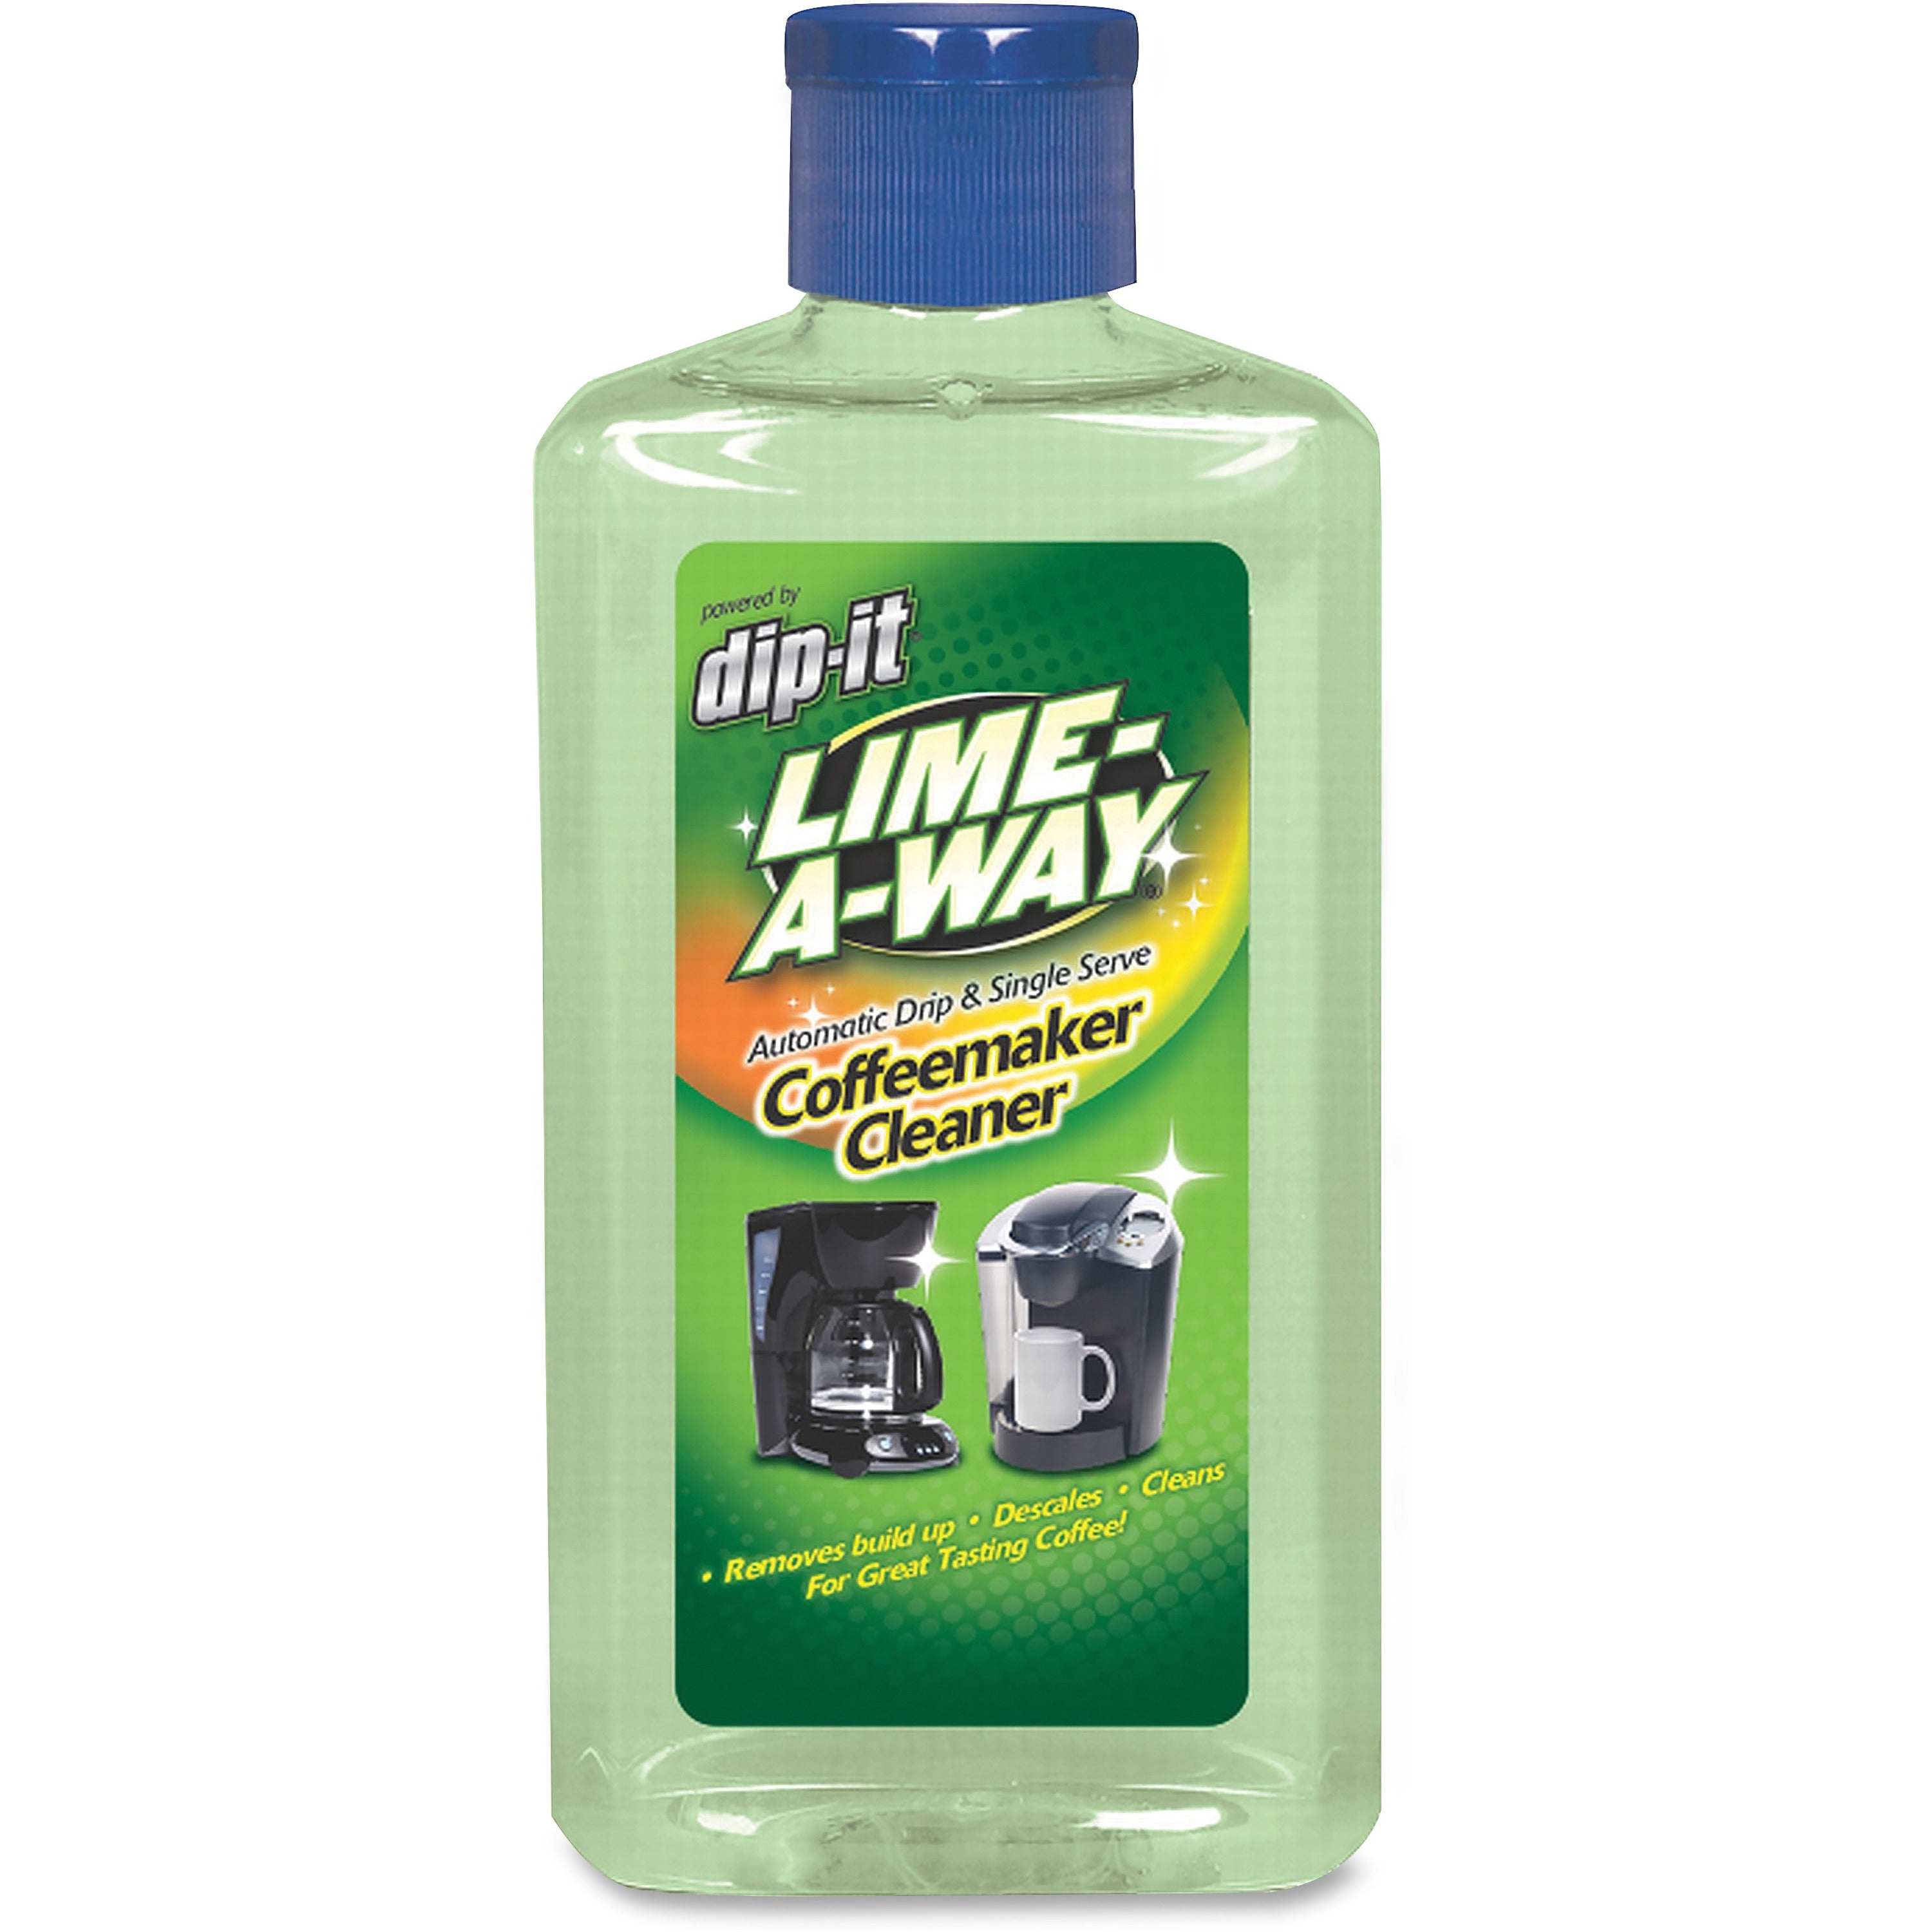 Lime-A-Way Coffemaker Cleaner - For Coffee Machine - Ready-To-Use - 7 fl oz (0.2 quart) - 1 Each - Light Green - 